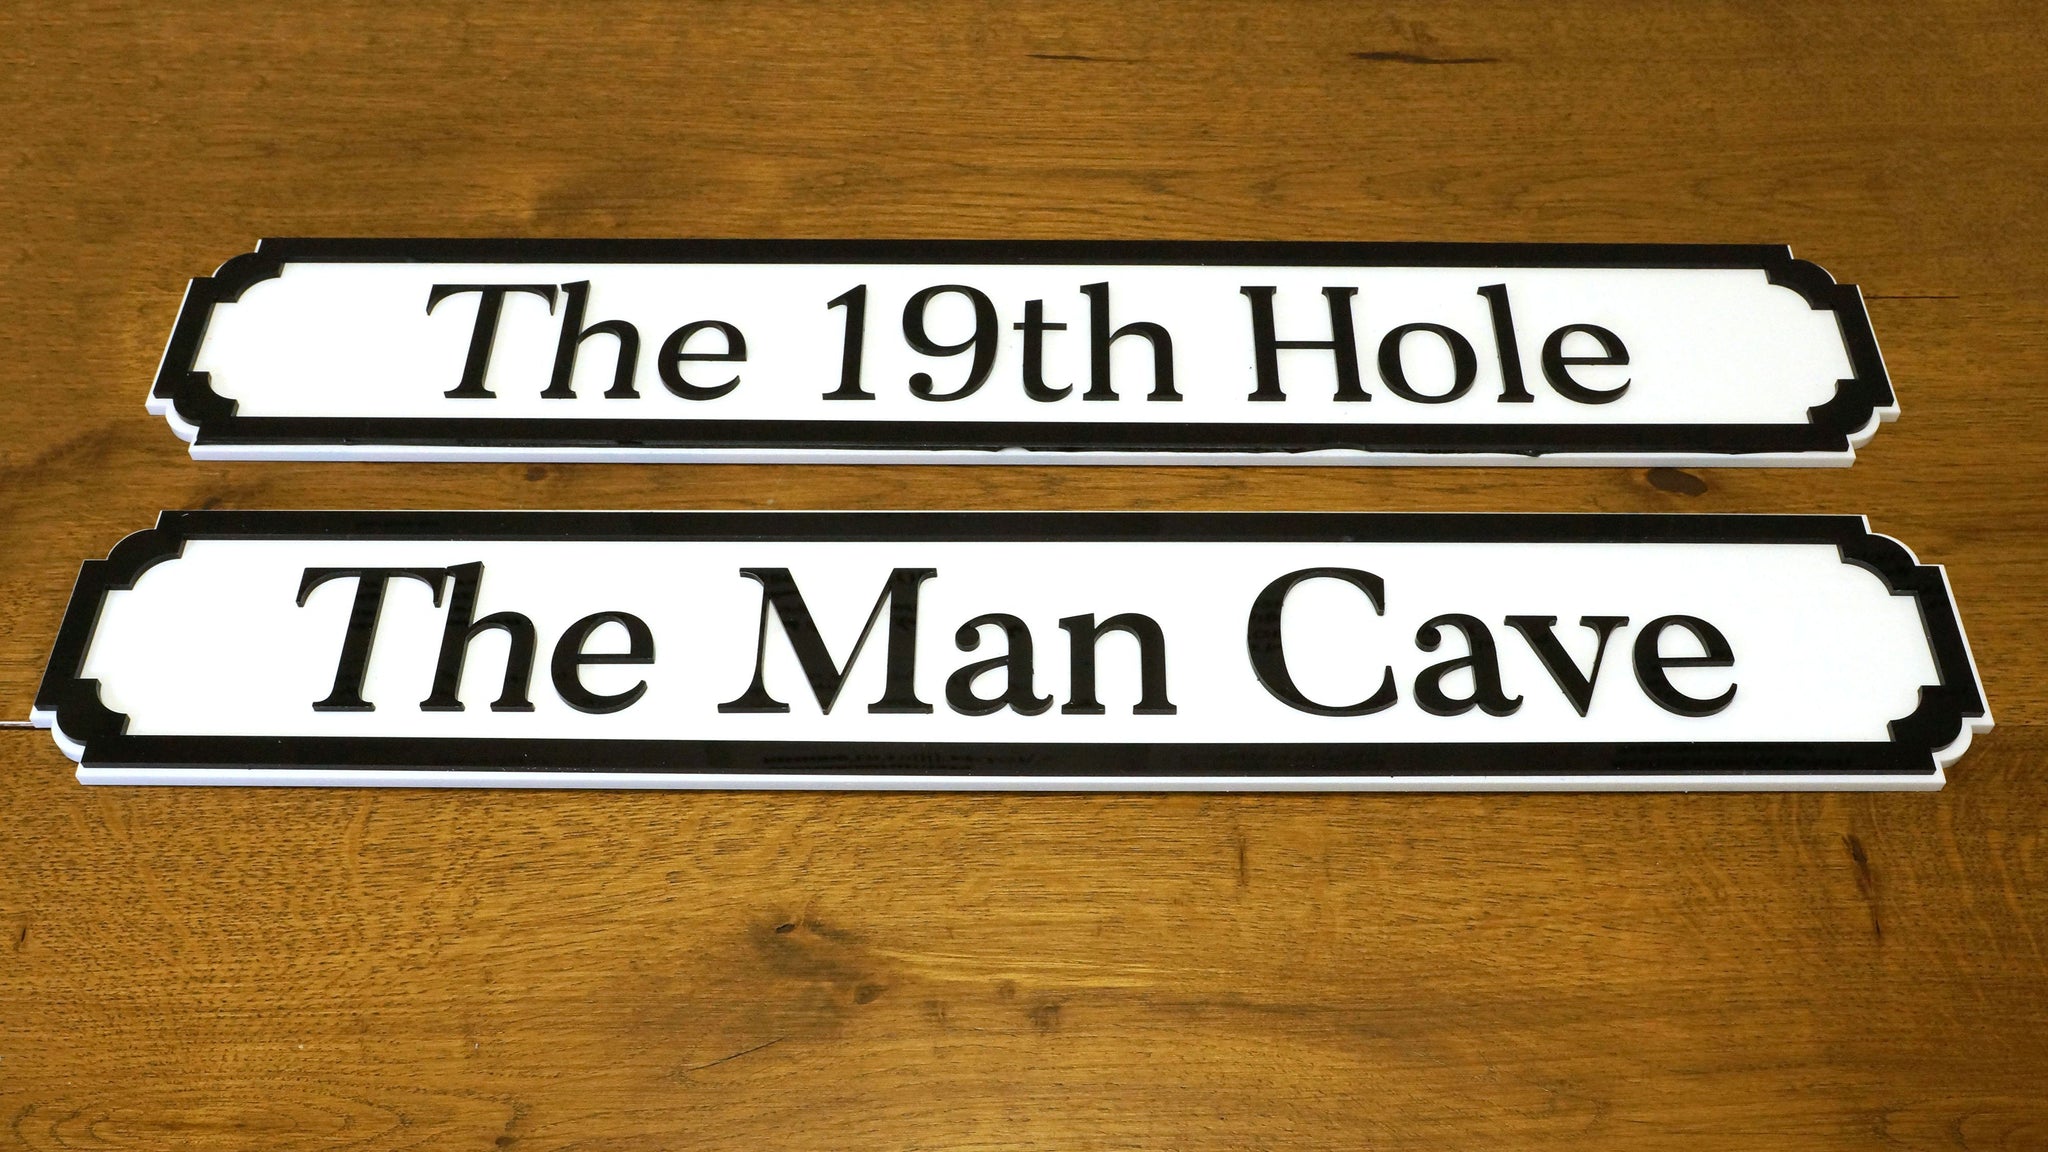 Acrylic Outdoor Personalised Street Sign / Pub Sign / House Name / Name Plaque - Just Another Gadget